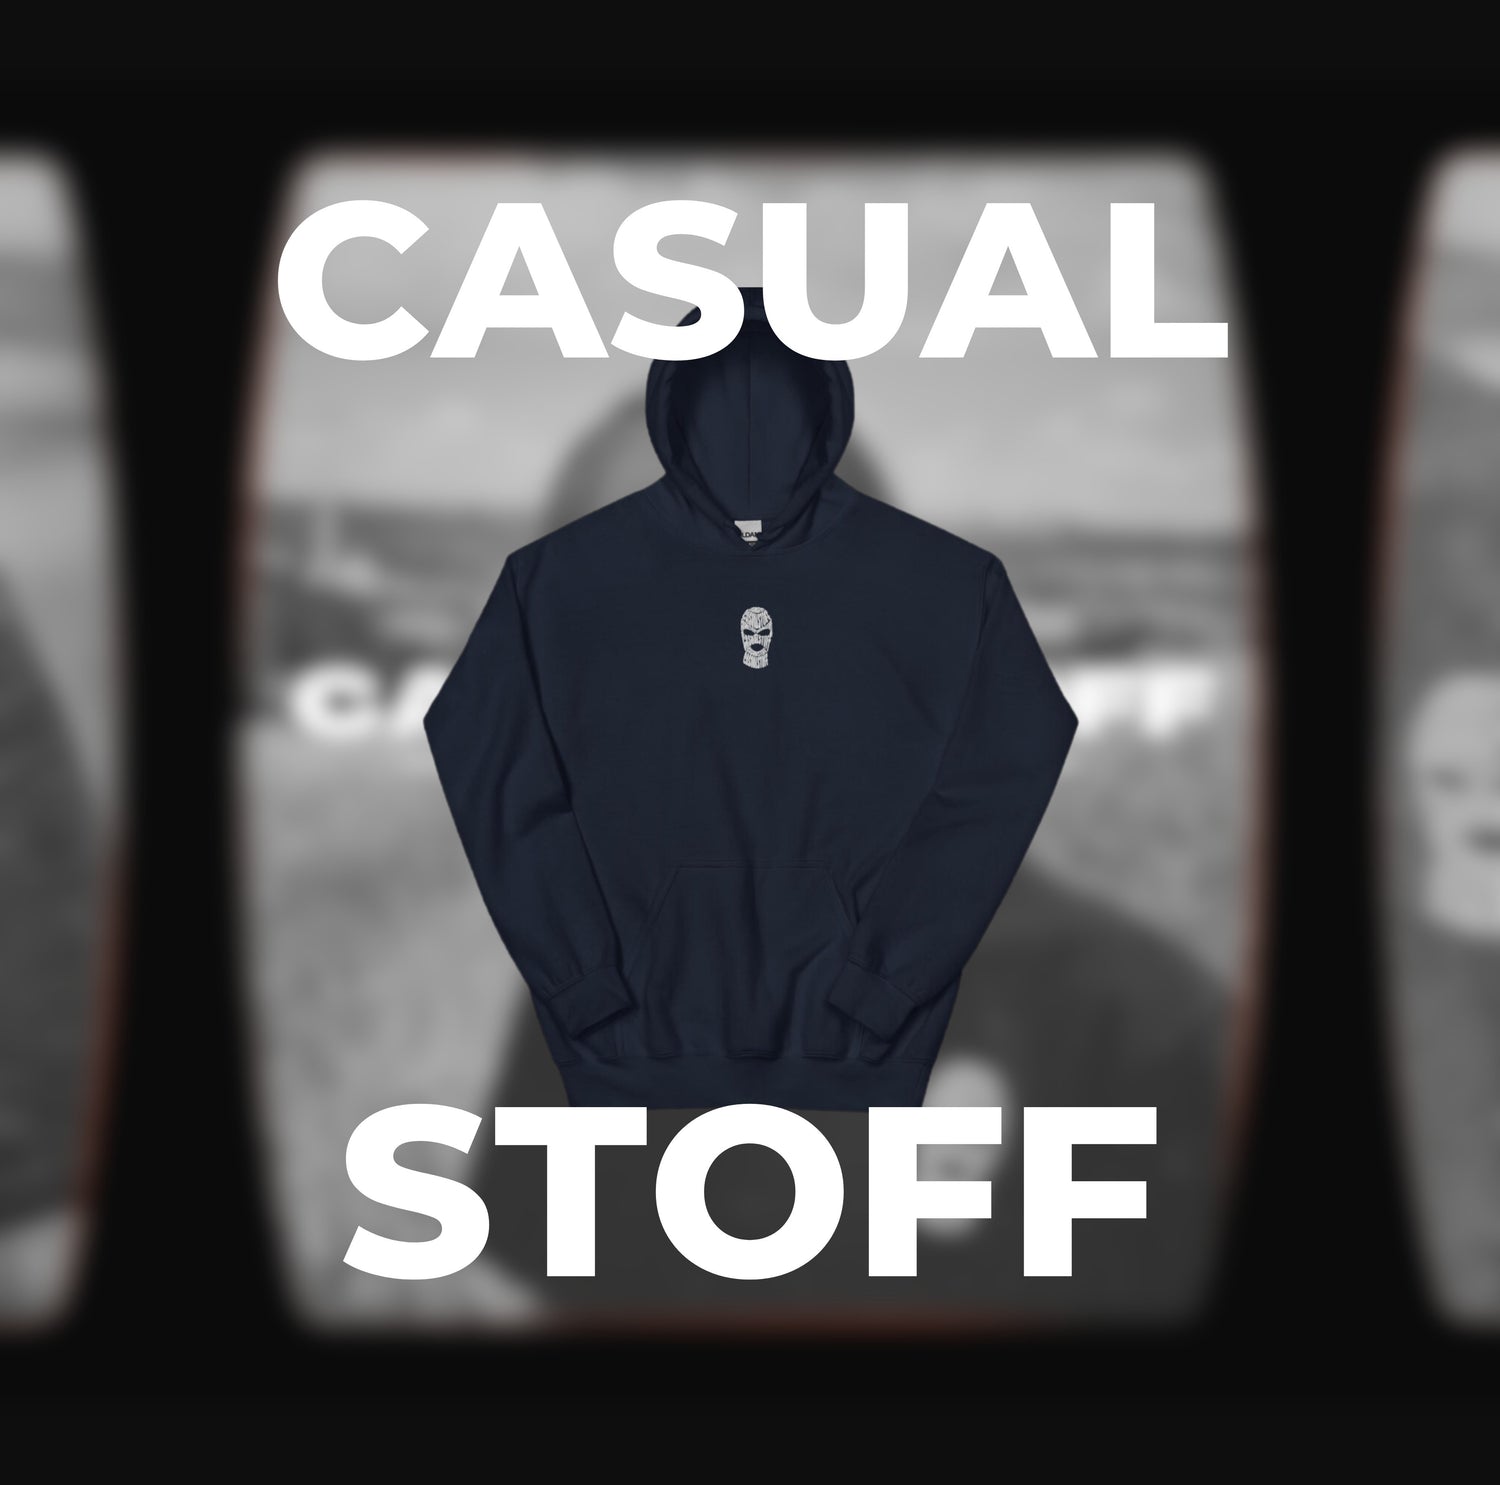 Hoodies by Casualstoff